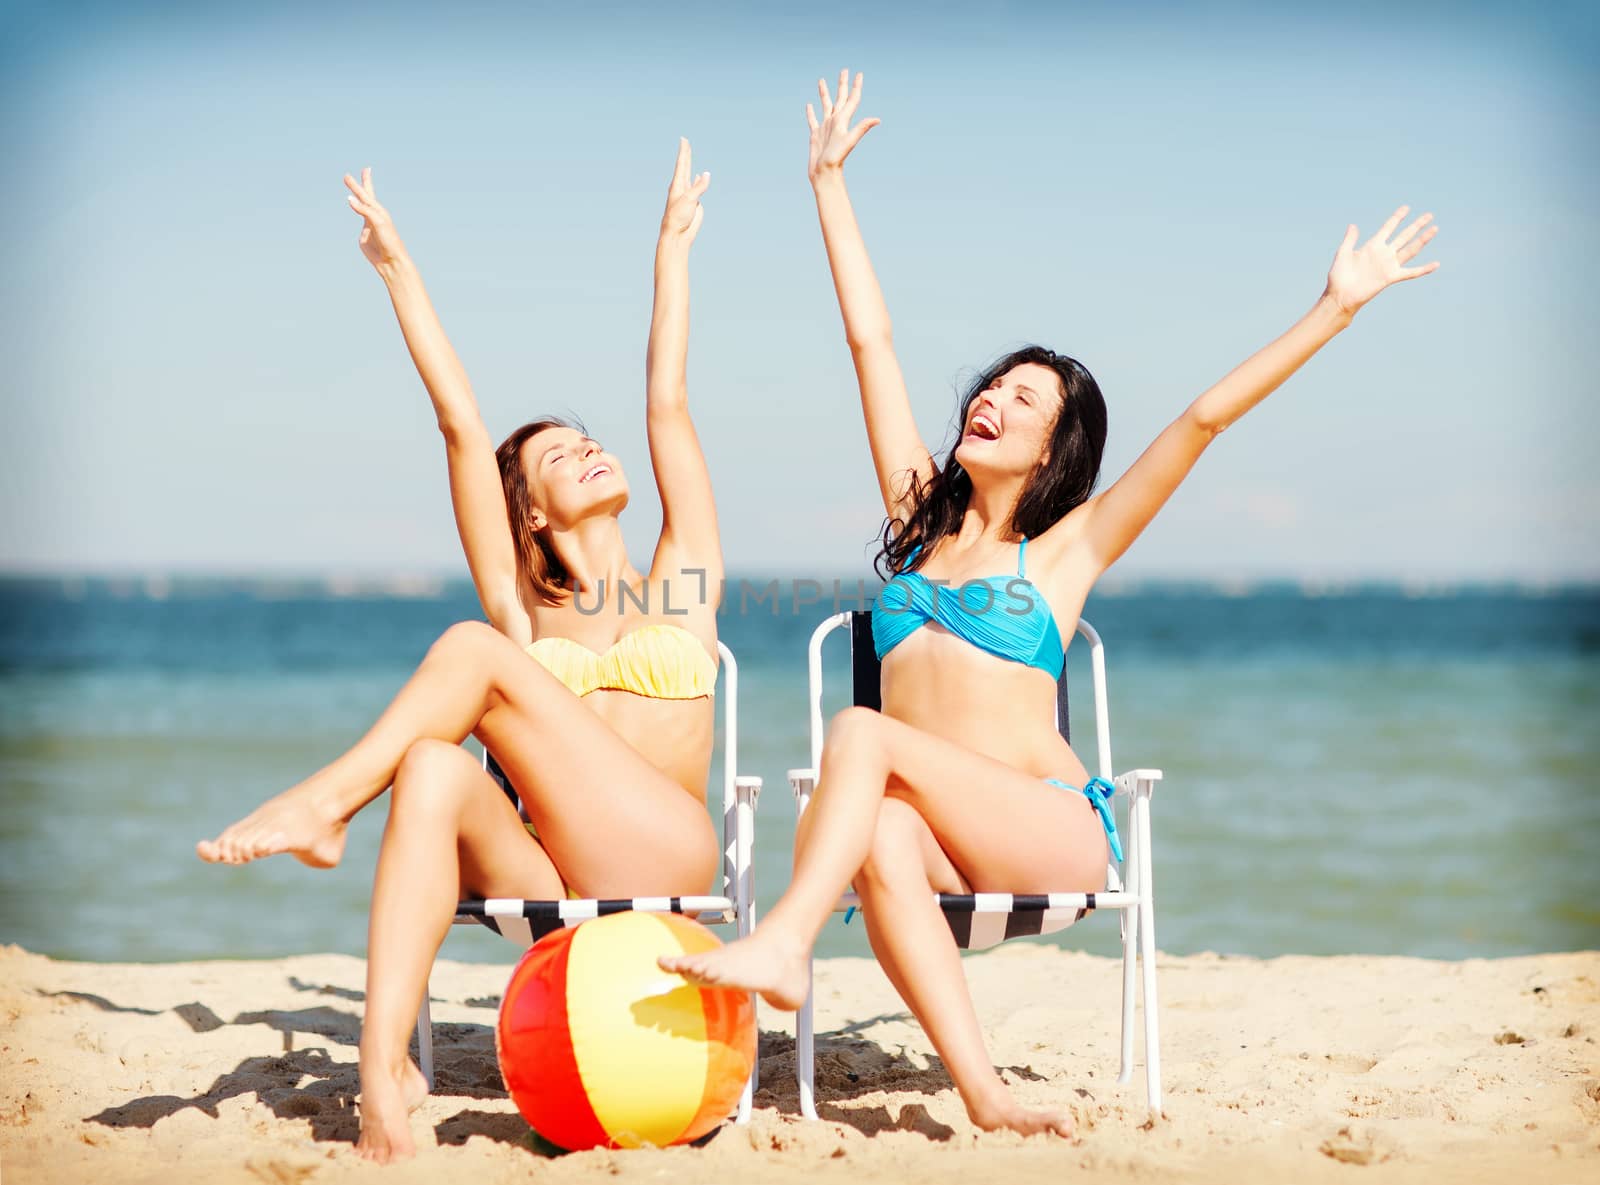 summer holidays and vacation - girls sunbathing on the beach chairs